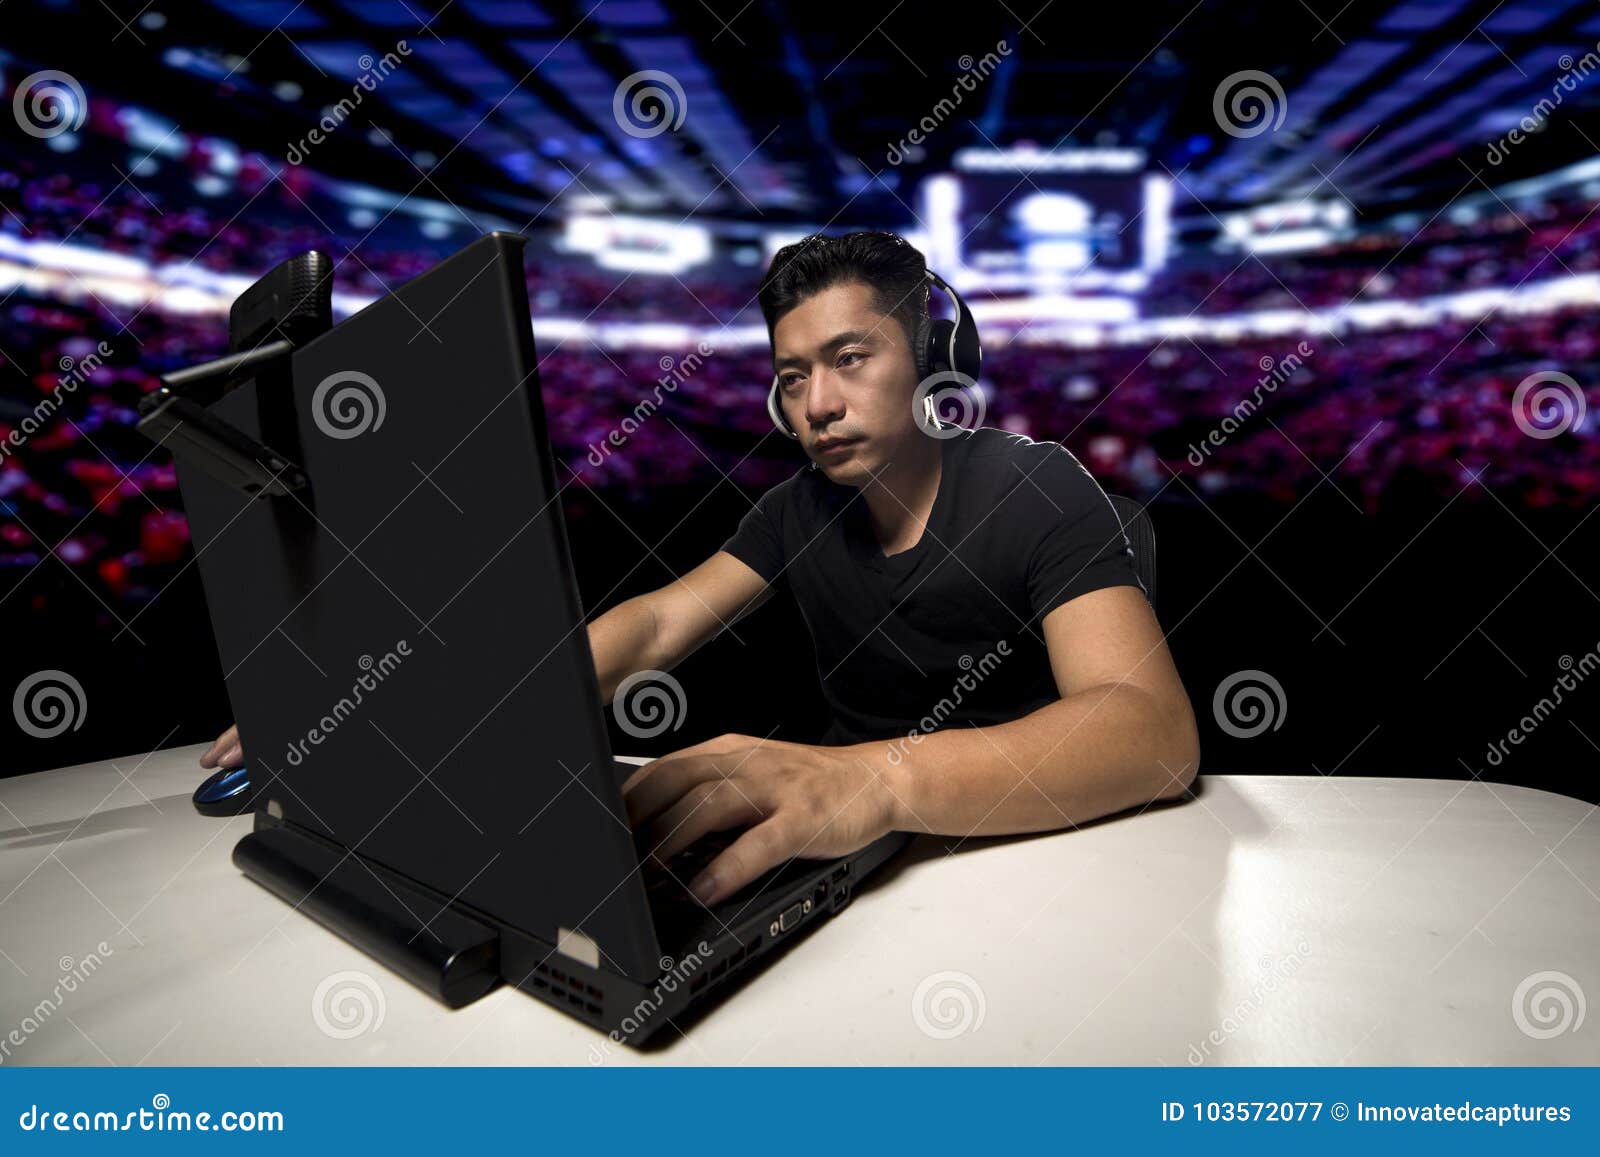 ESports Professional Competitive Gamer Stock Image